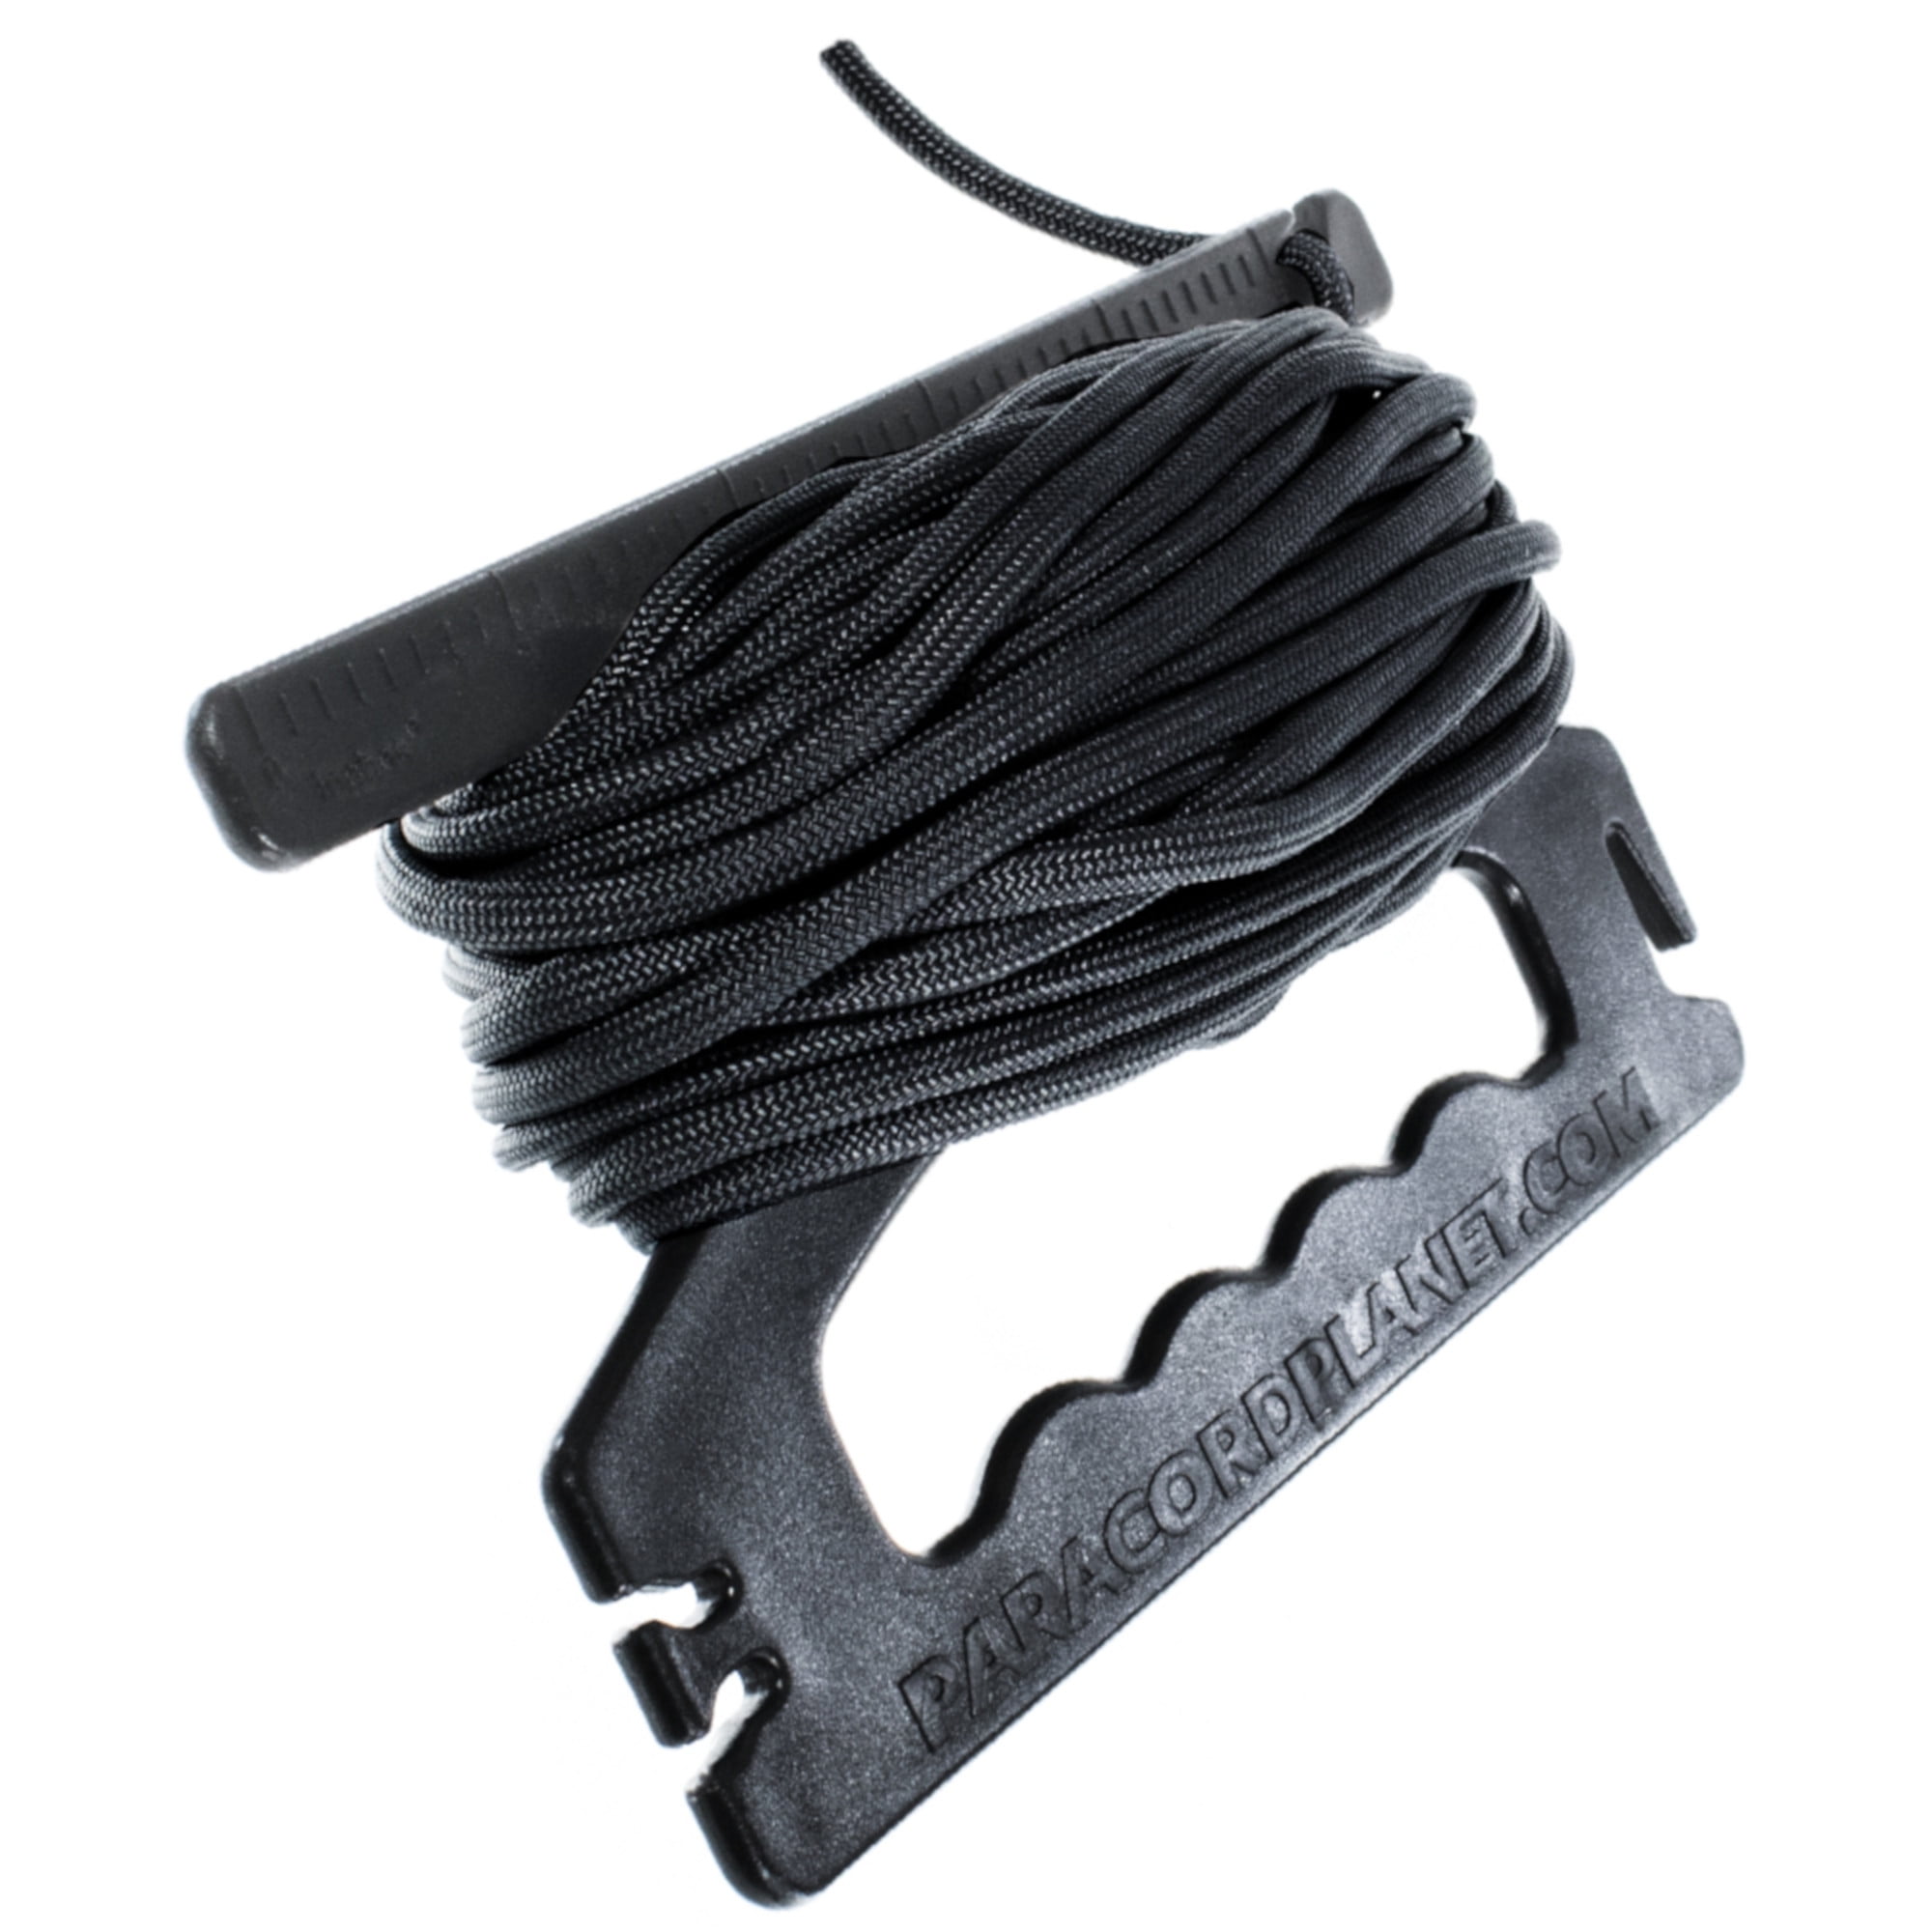 Paracord Spool Tool Holds 100ft Parachute Cord Storing Cutting Finishing 